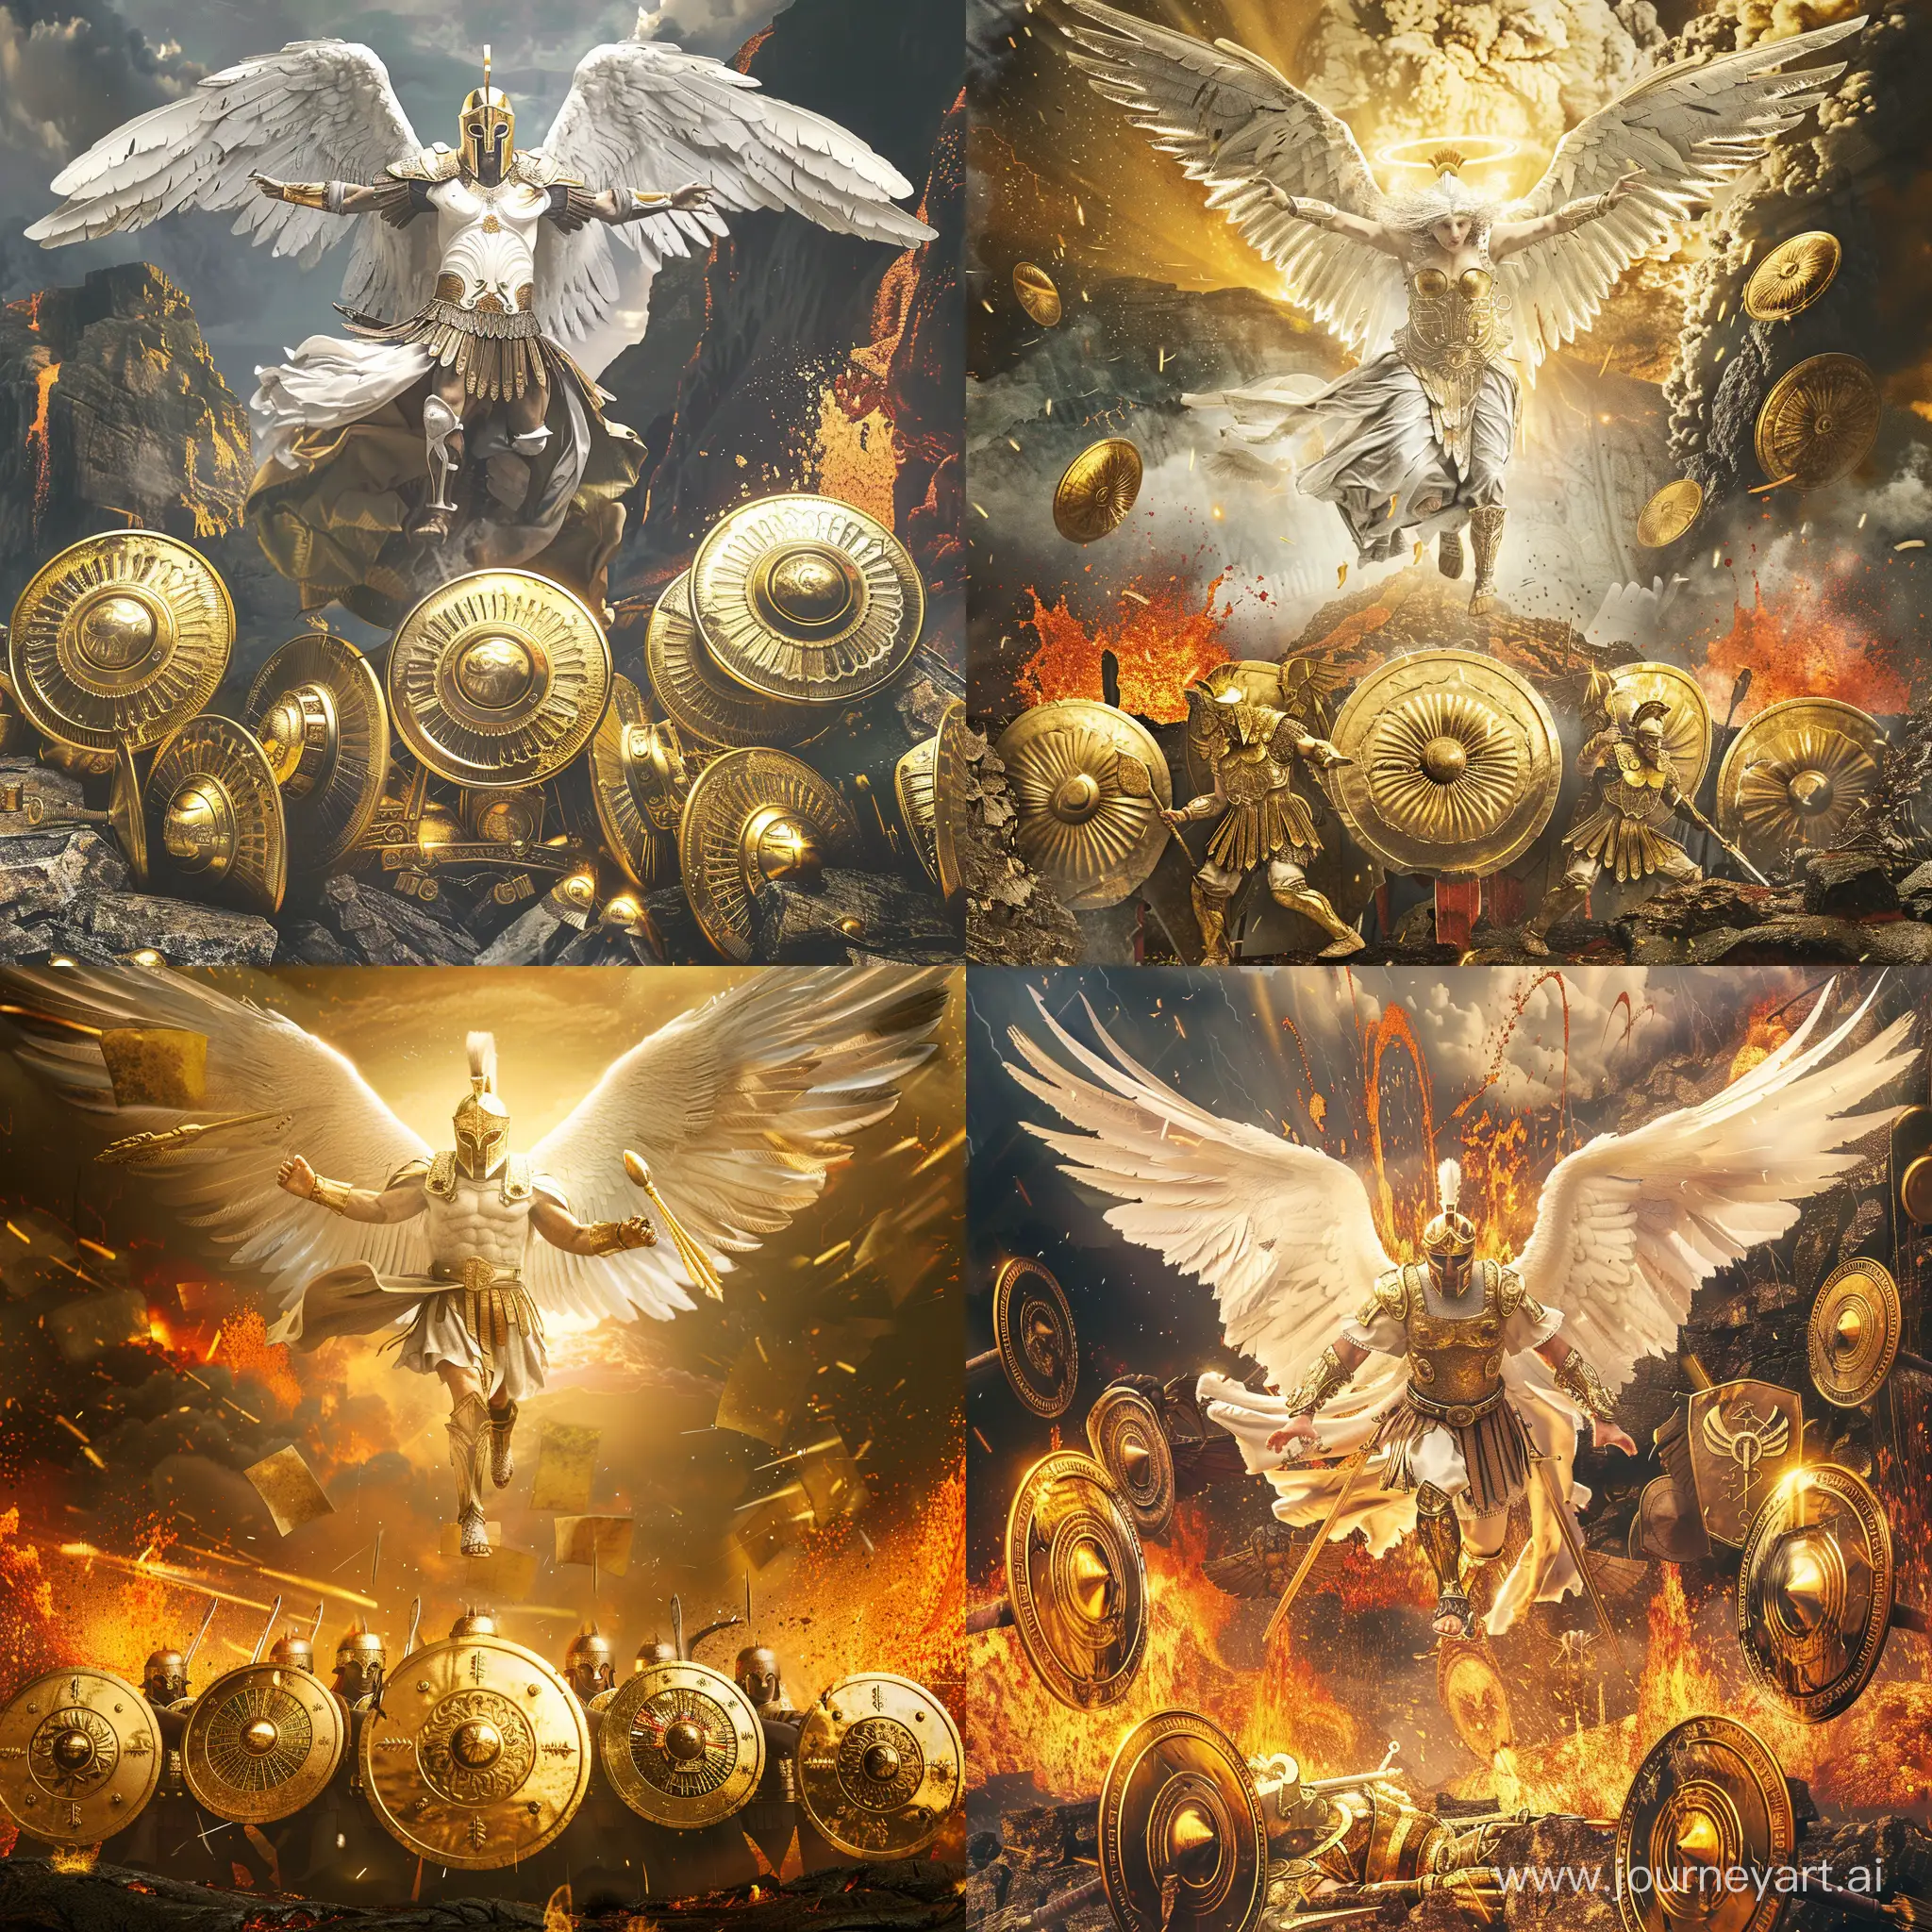 archangel in white and gold armor  floats above soldier's spartan shield wall, golden shields, volcanic backdrop